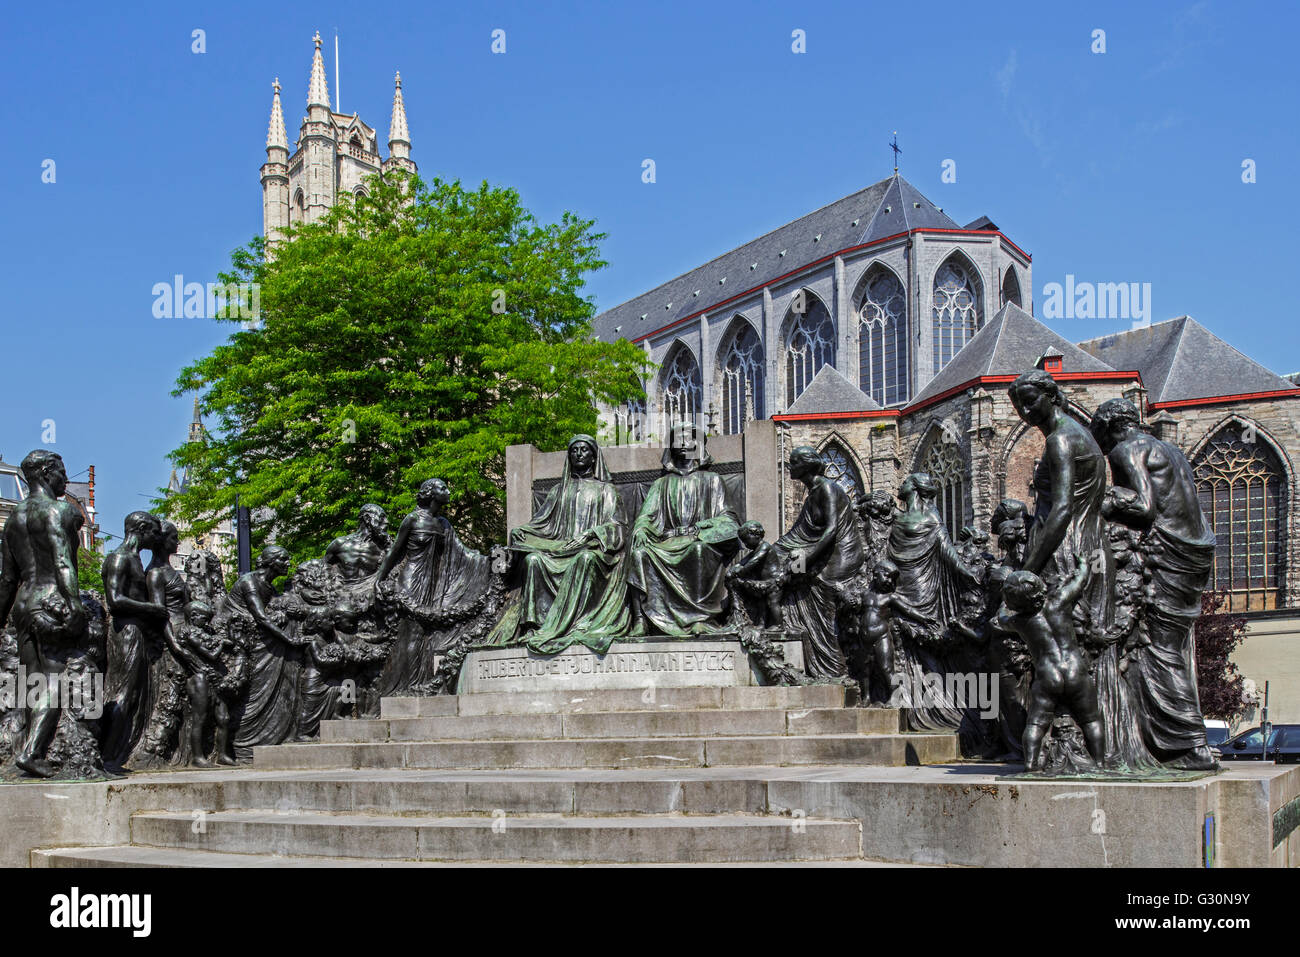 Monument for Van Eyck brothers, Jan and Hubert, painters of Ghent Altarpiece / Adoration of the Mystic Lamb in Gent, Belgium Stock Photo